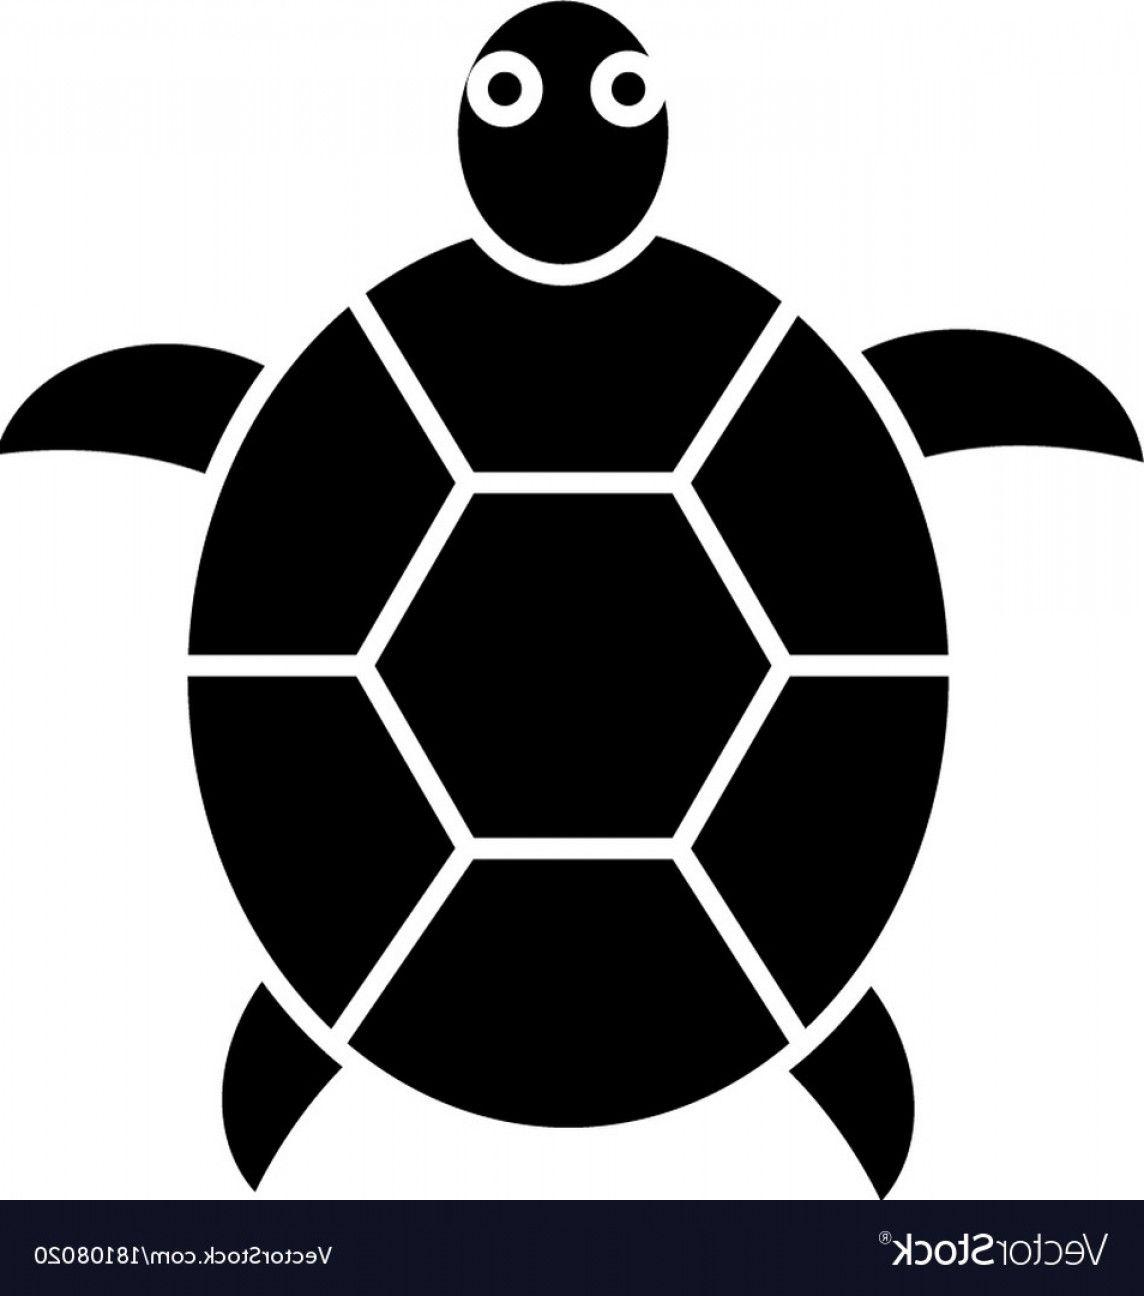 Black and White Turtle Logo - Turtle Icon Black Sign On Vector